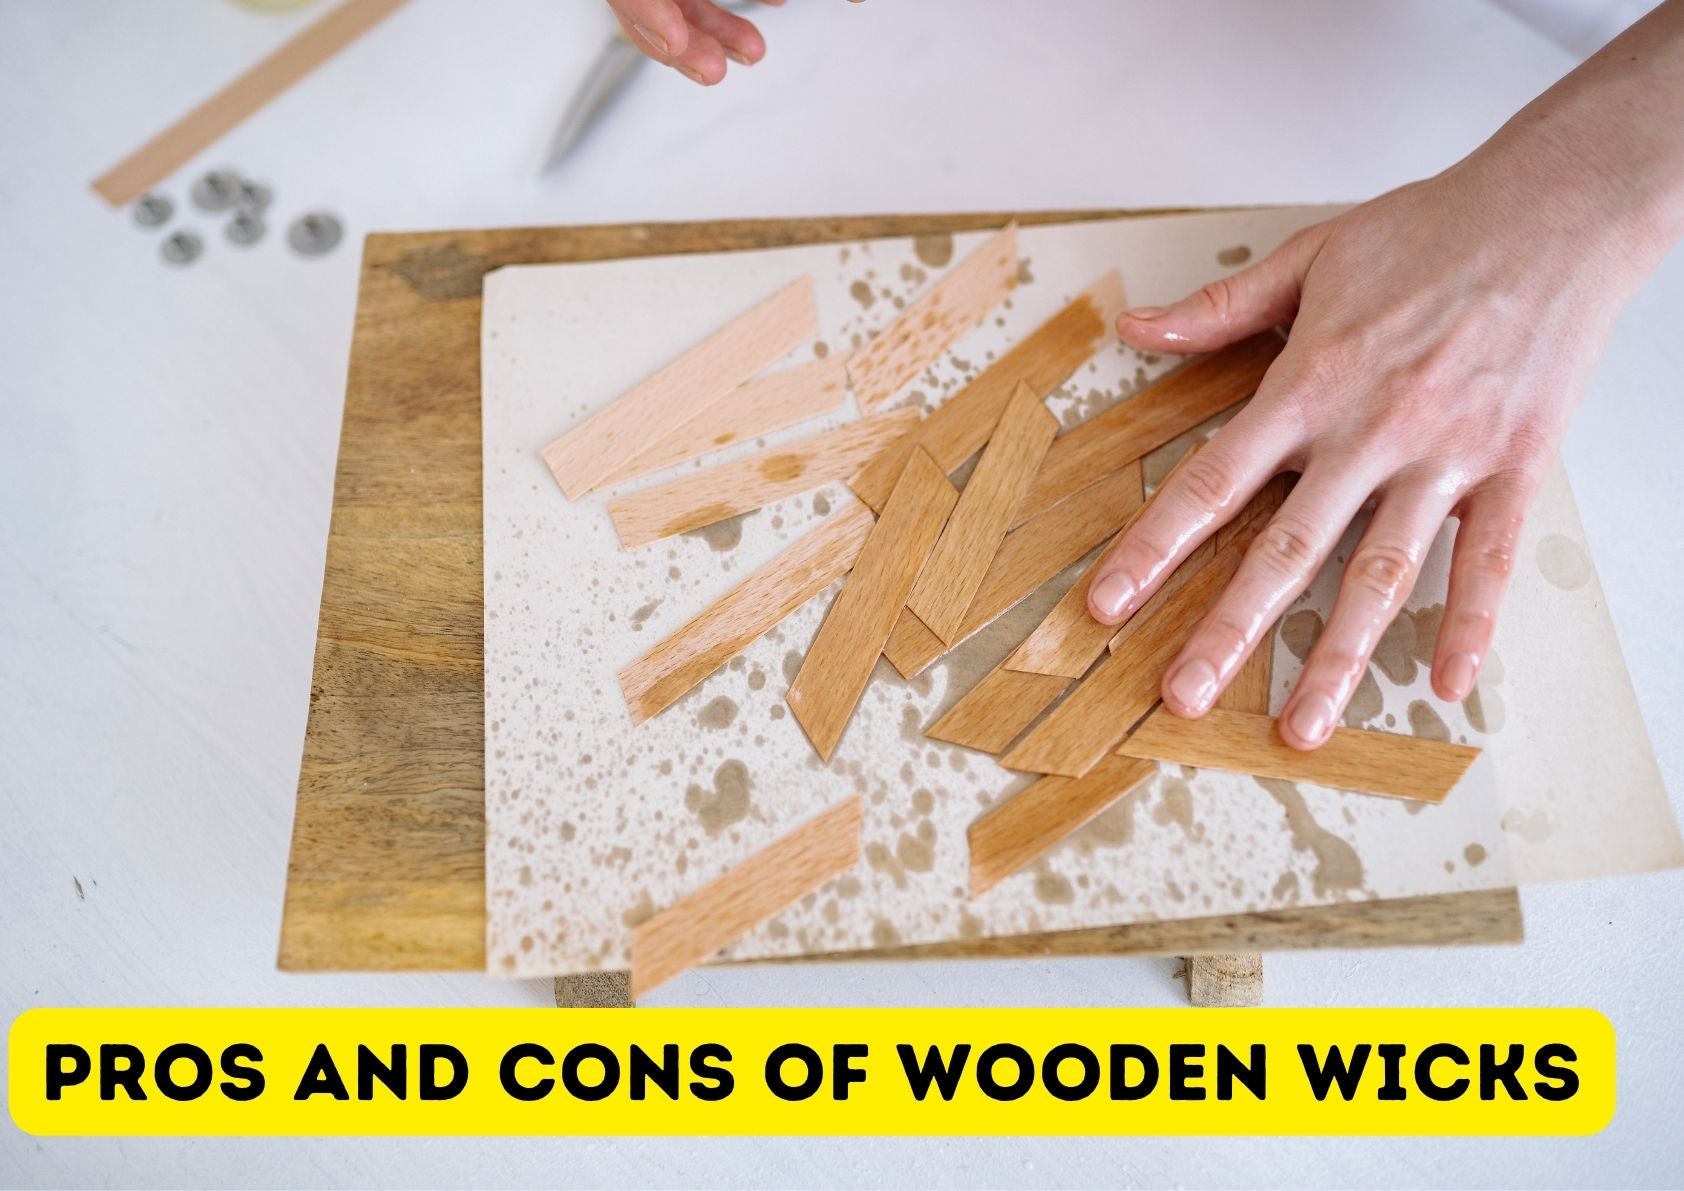 Pros and cons of wooden wicks